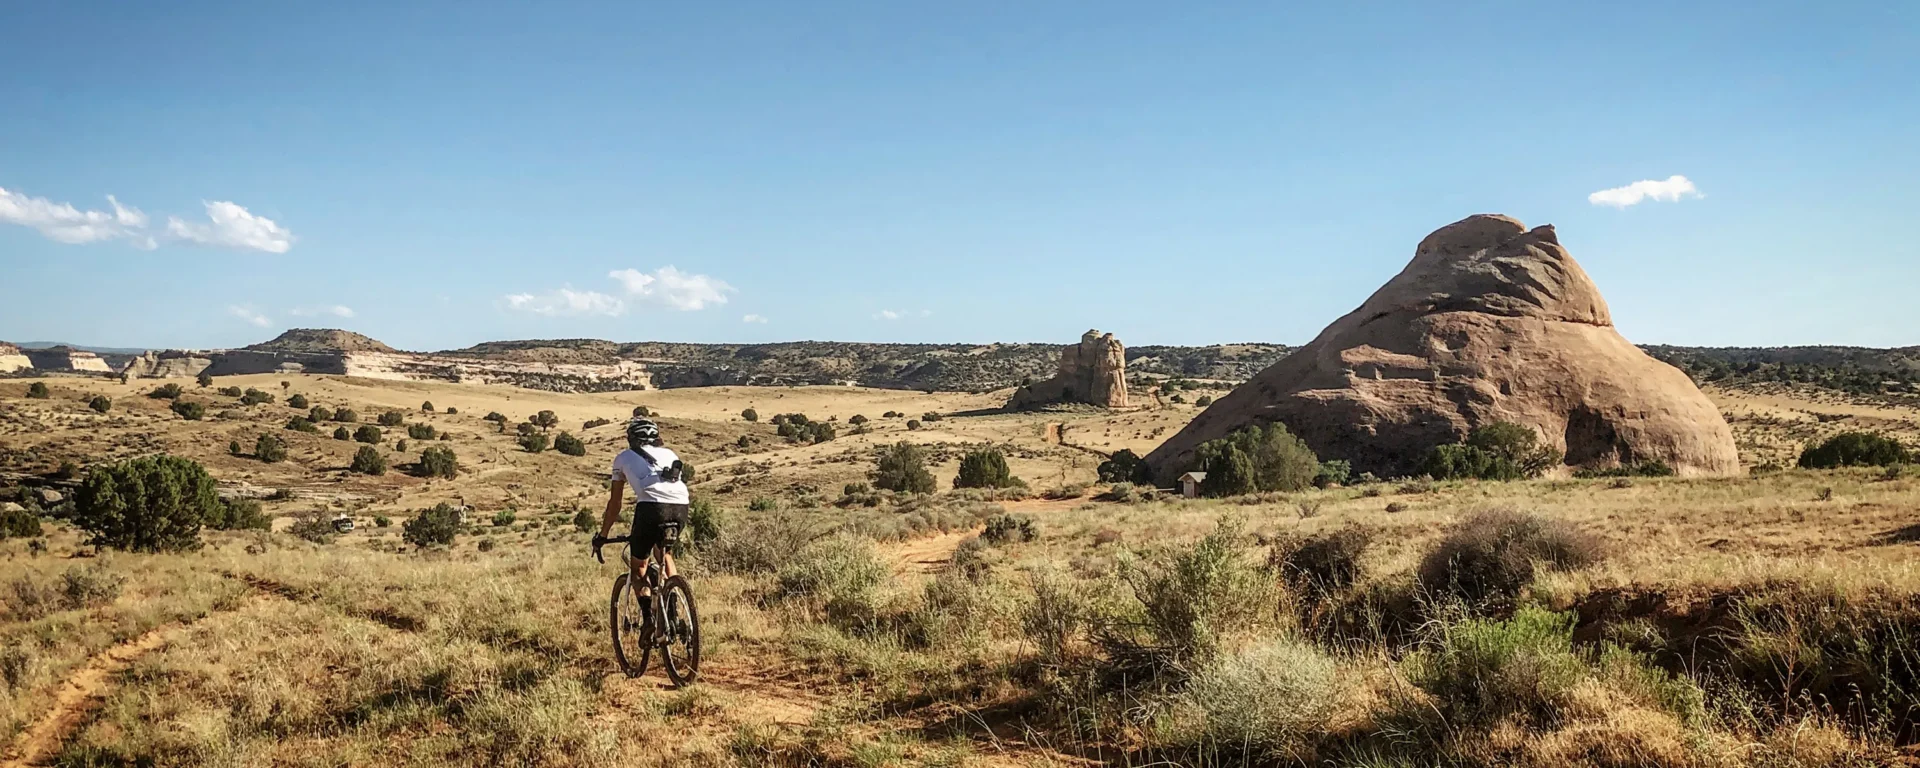 A cyclist rides along a desert gravel path. Rock formations surround the landscape. The sky is a bright blue, and the sun is shining.